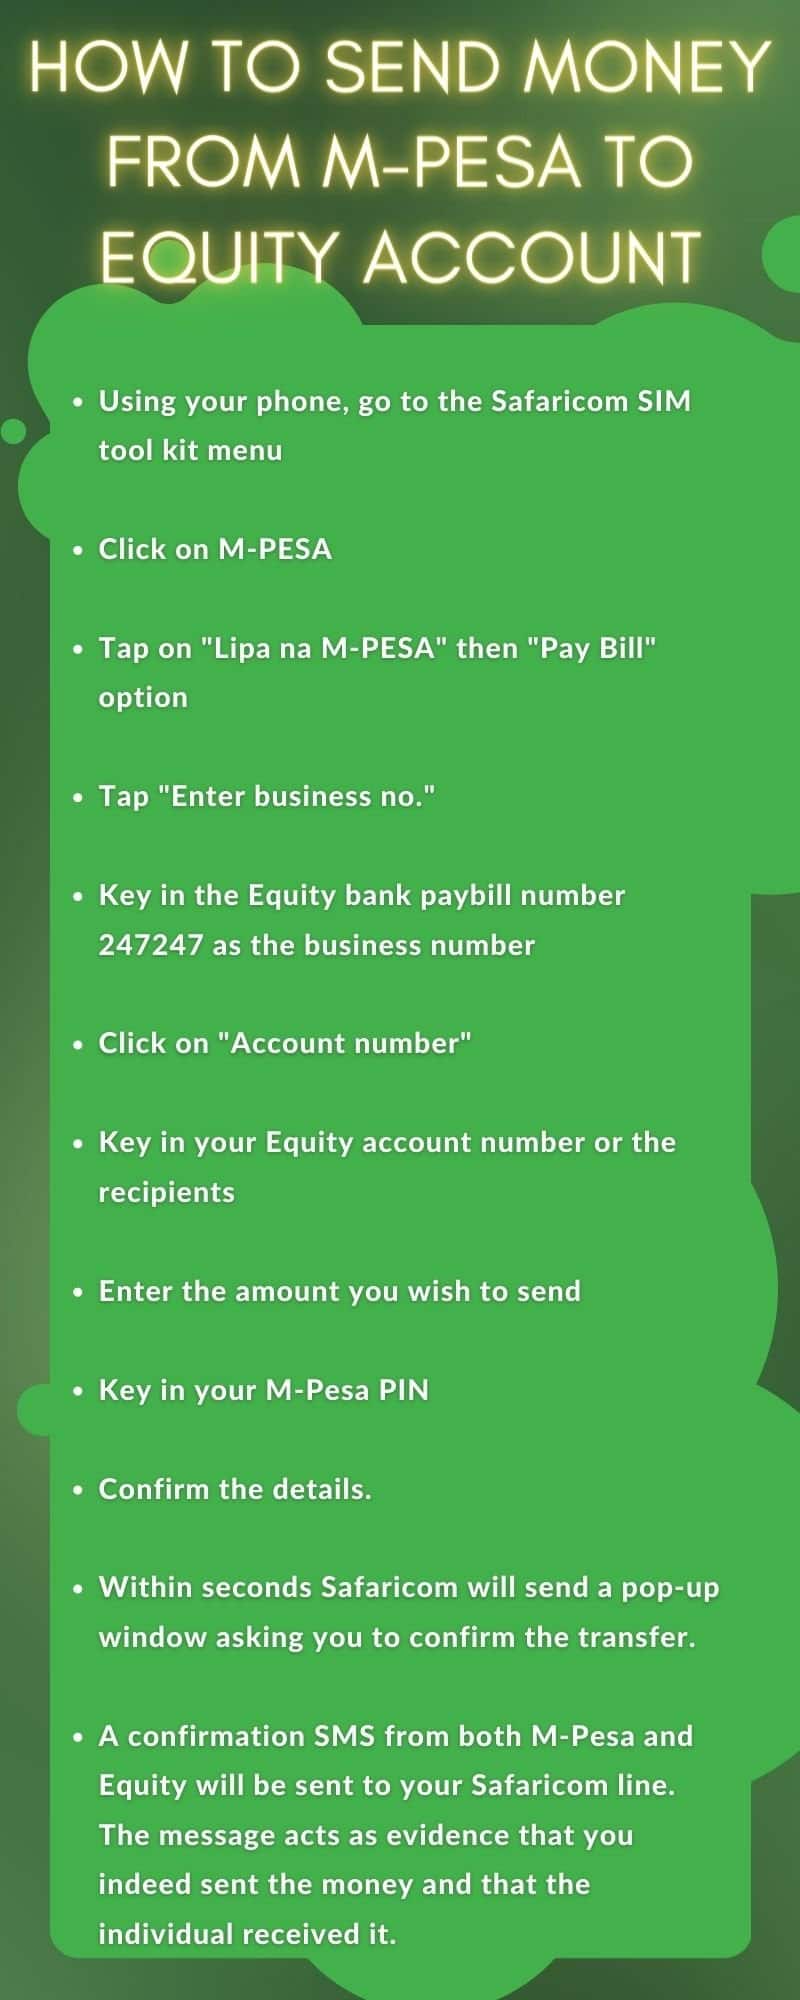 How to send money from M-Pesa